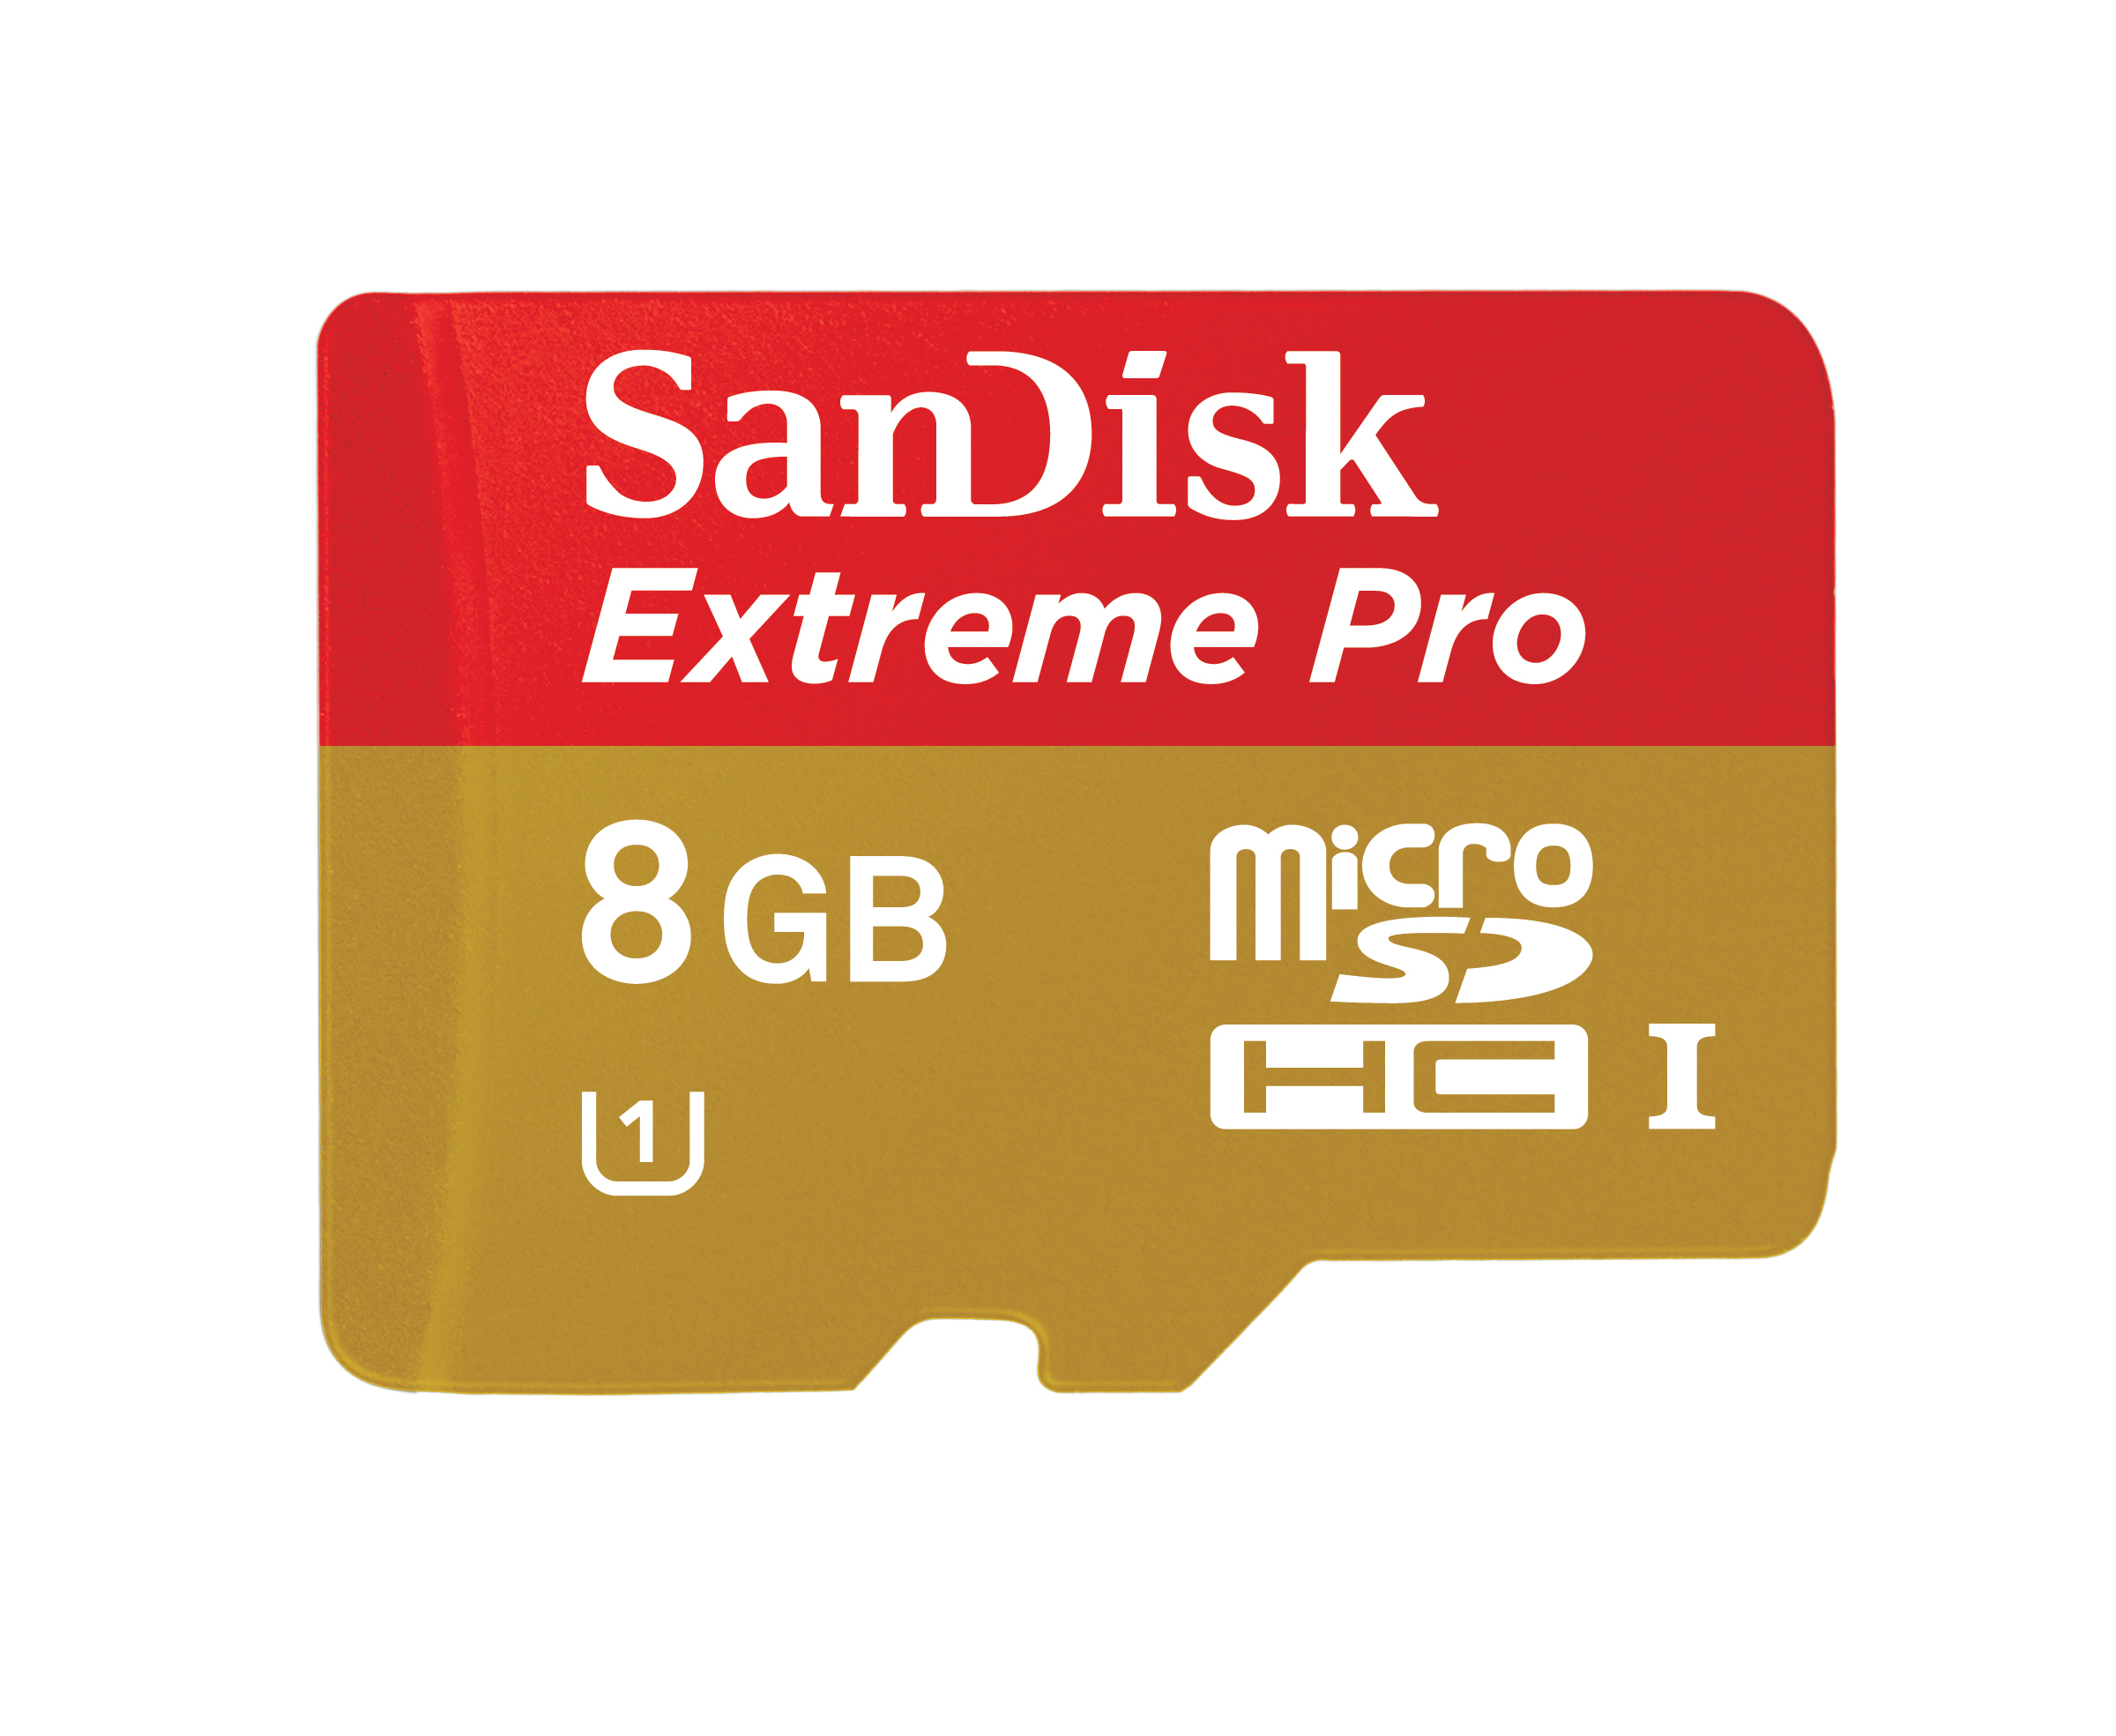 SanDisk Extreme Pro Micro SDHC UHS-I card - 8GB